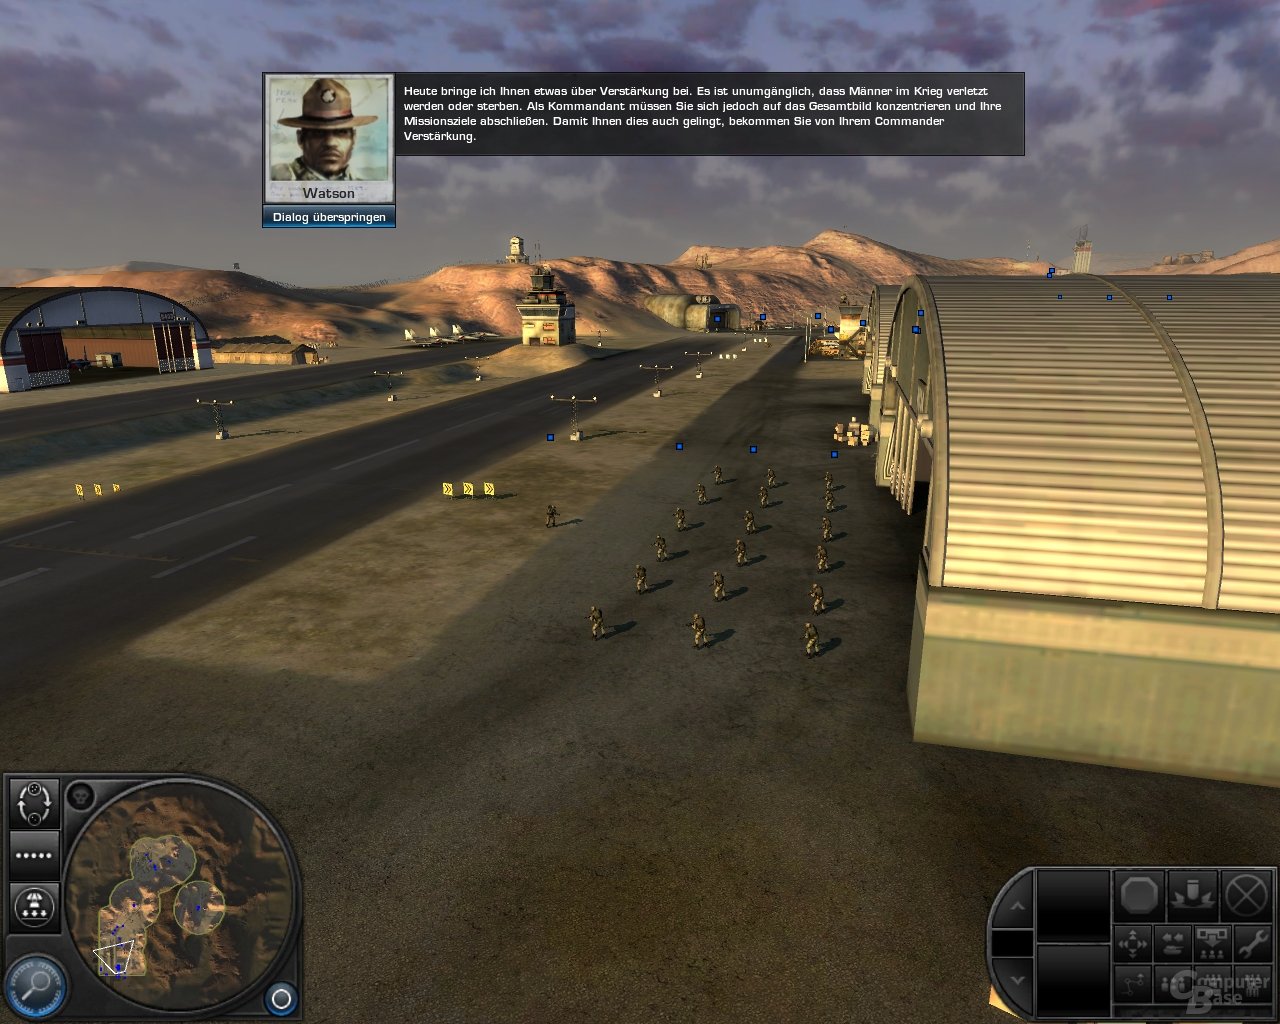 World in Conflict